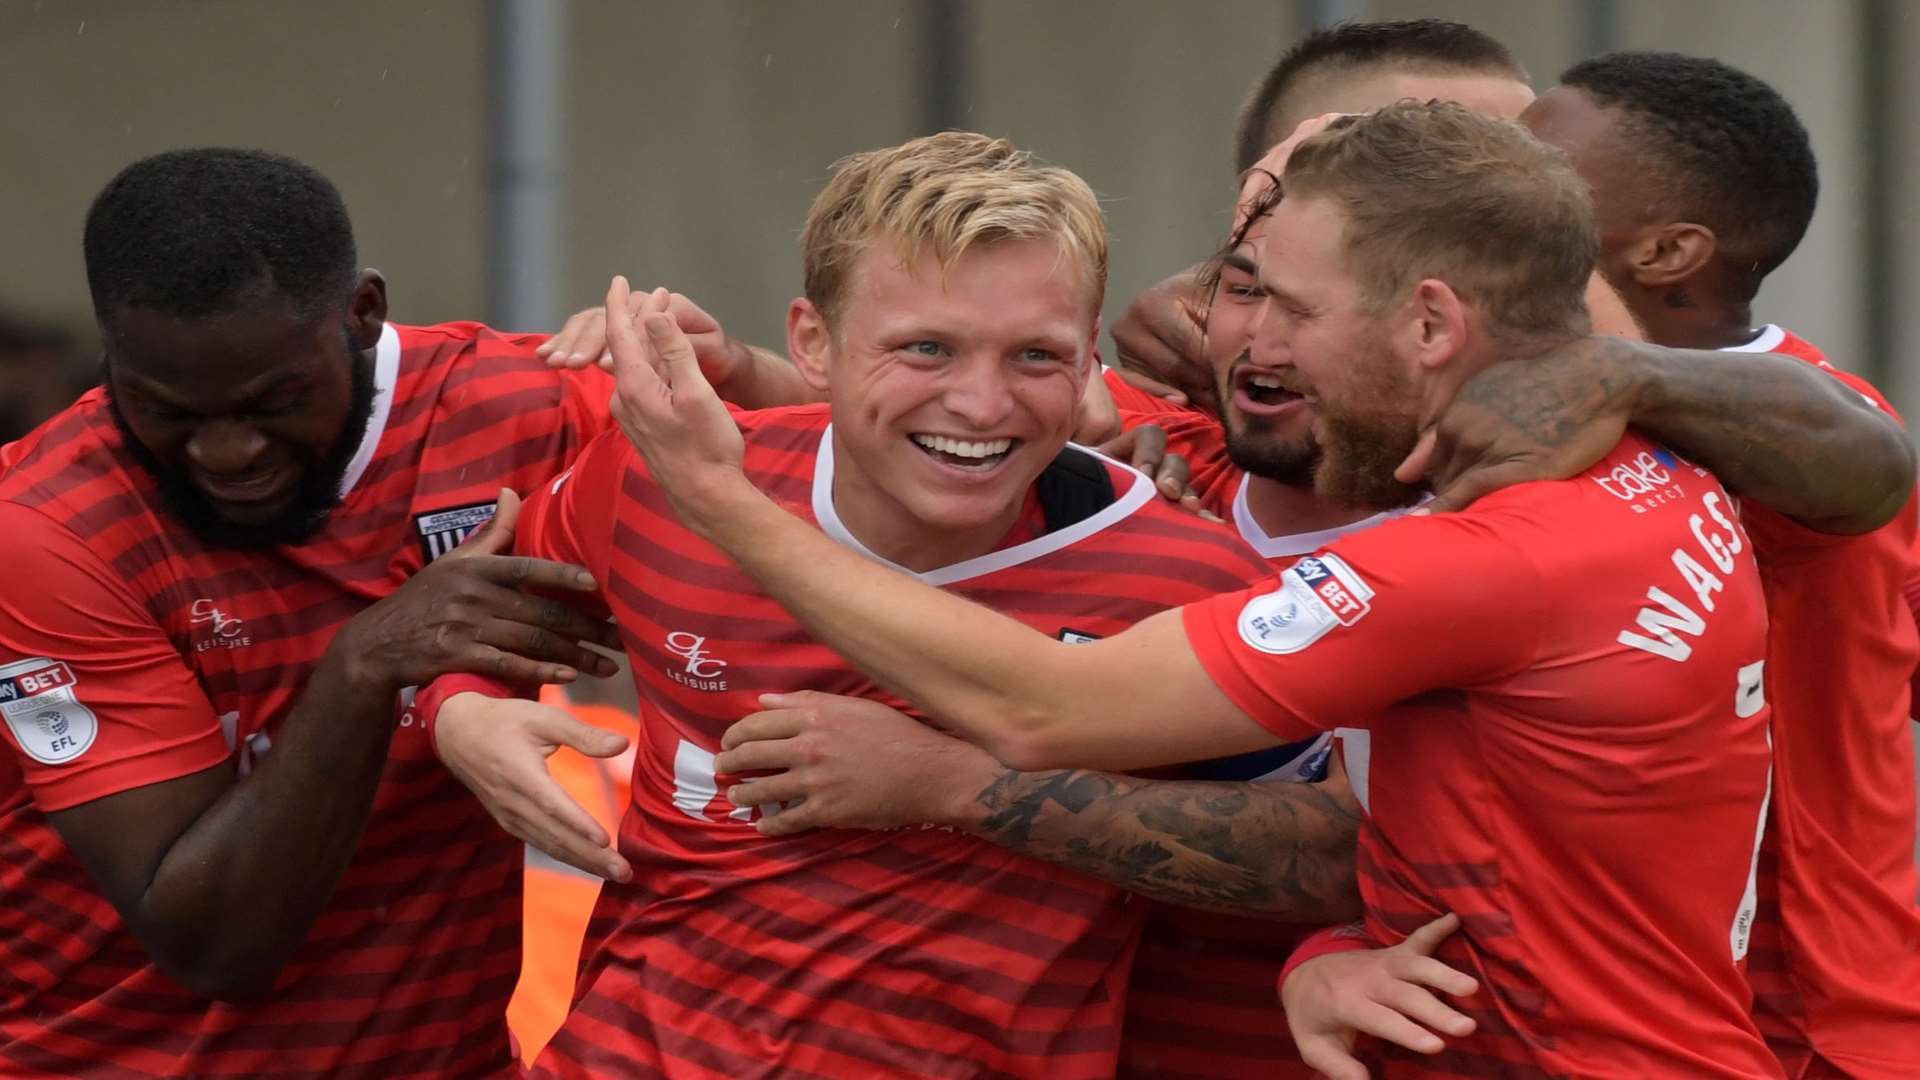 Things look good for Gills after Josh Wright's opener Picture: Barry Goodwin